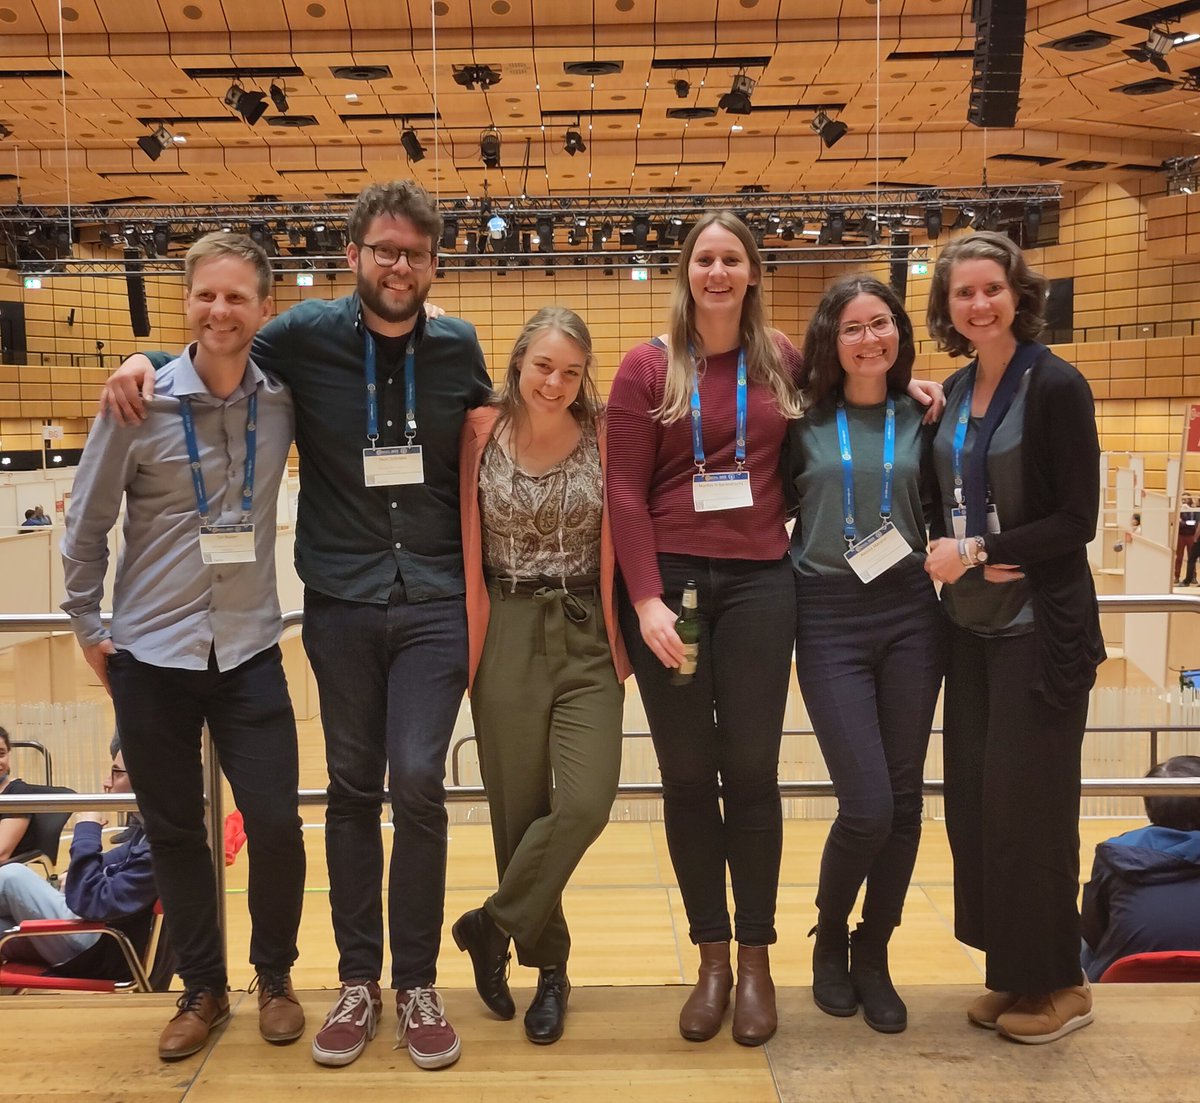 #EGU23 is a wrap! The @VU_IVM Drought group had fun. We thoroughly enjoyed presenting our research, getting inspired and connecting to old and new science friends. Now #trainfromEGU and back next you for more #drought #sociohydrology #adaptation #compound #risk science!